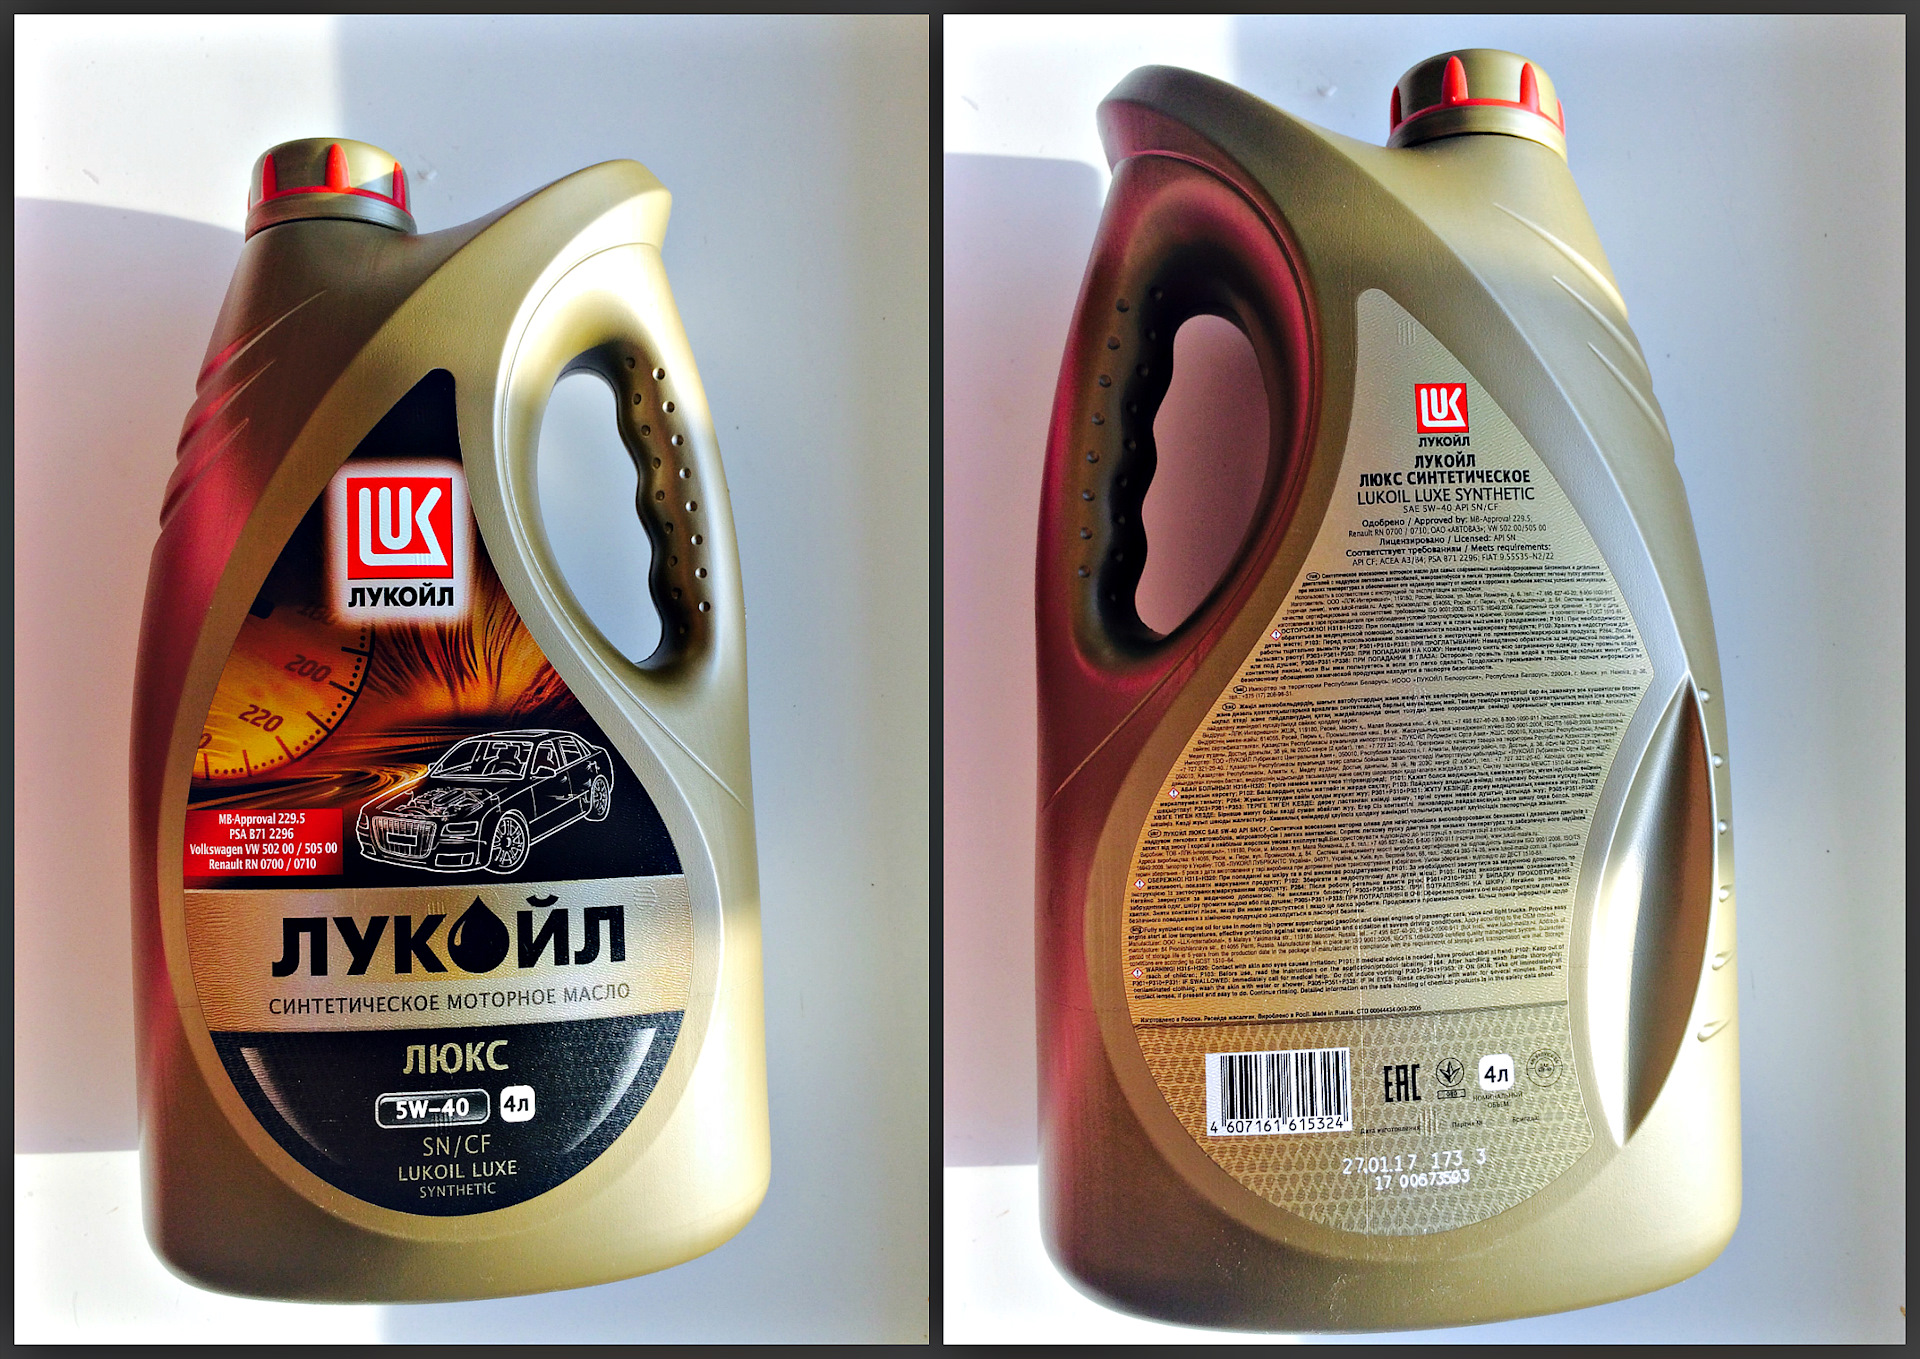 Лукойл кг масла. Lukoil Luxe Synthetic 5w-40. Лукойл Люкс 5в30 синтетика. Lukoil Luxe 5w-40. Lukoil 207465 масло моторное синтетическое 5w-40 4 л..